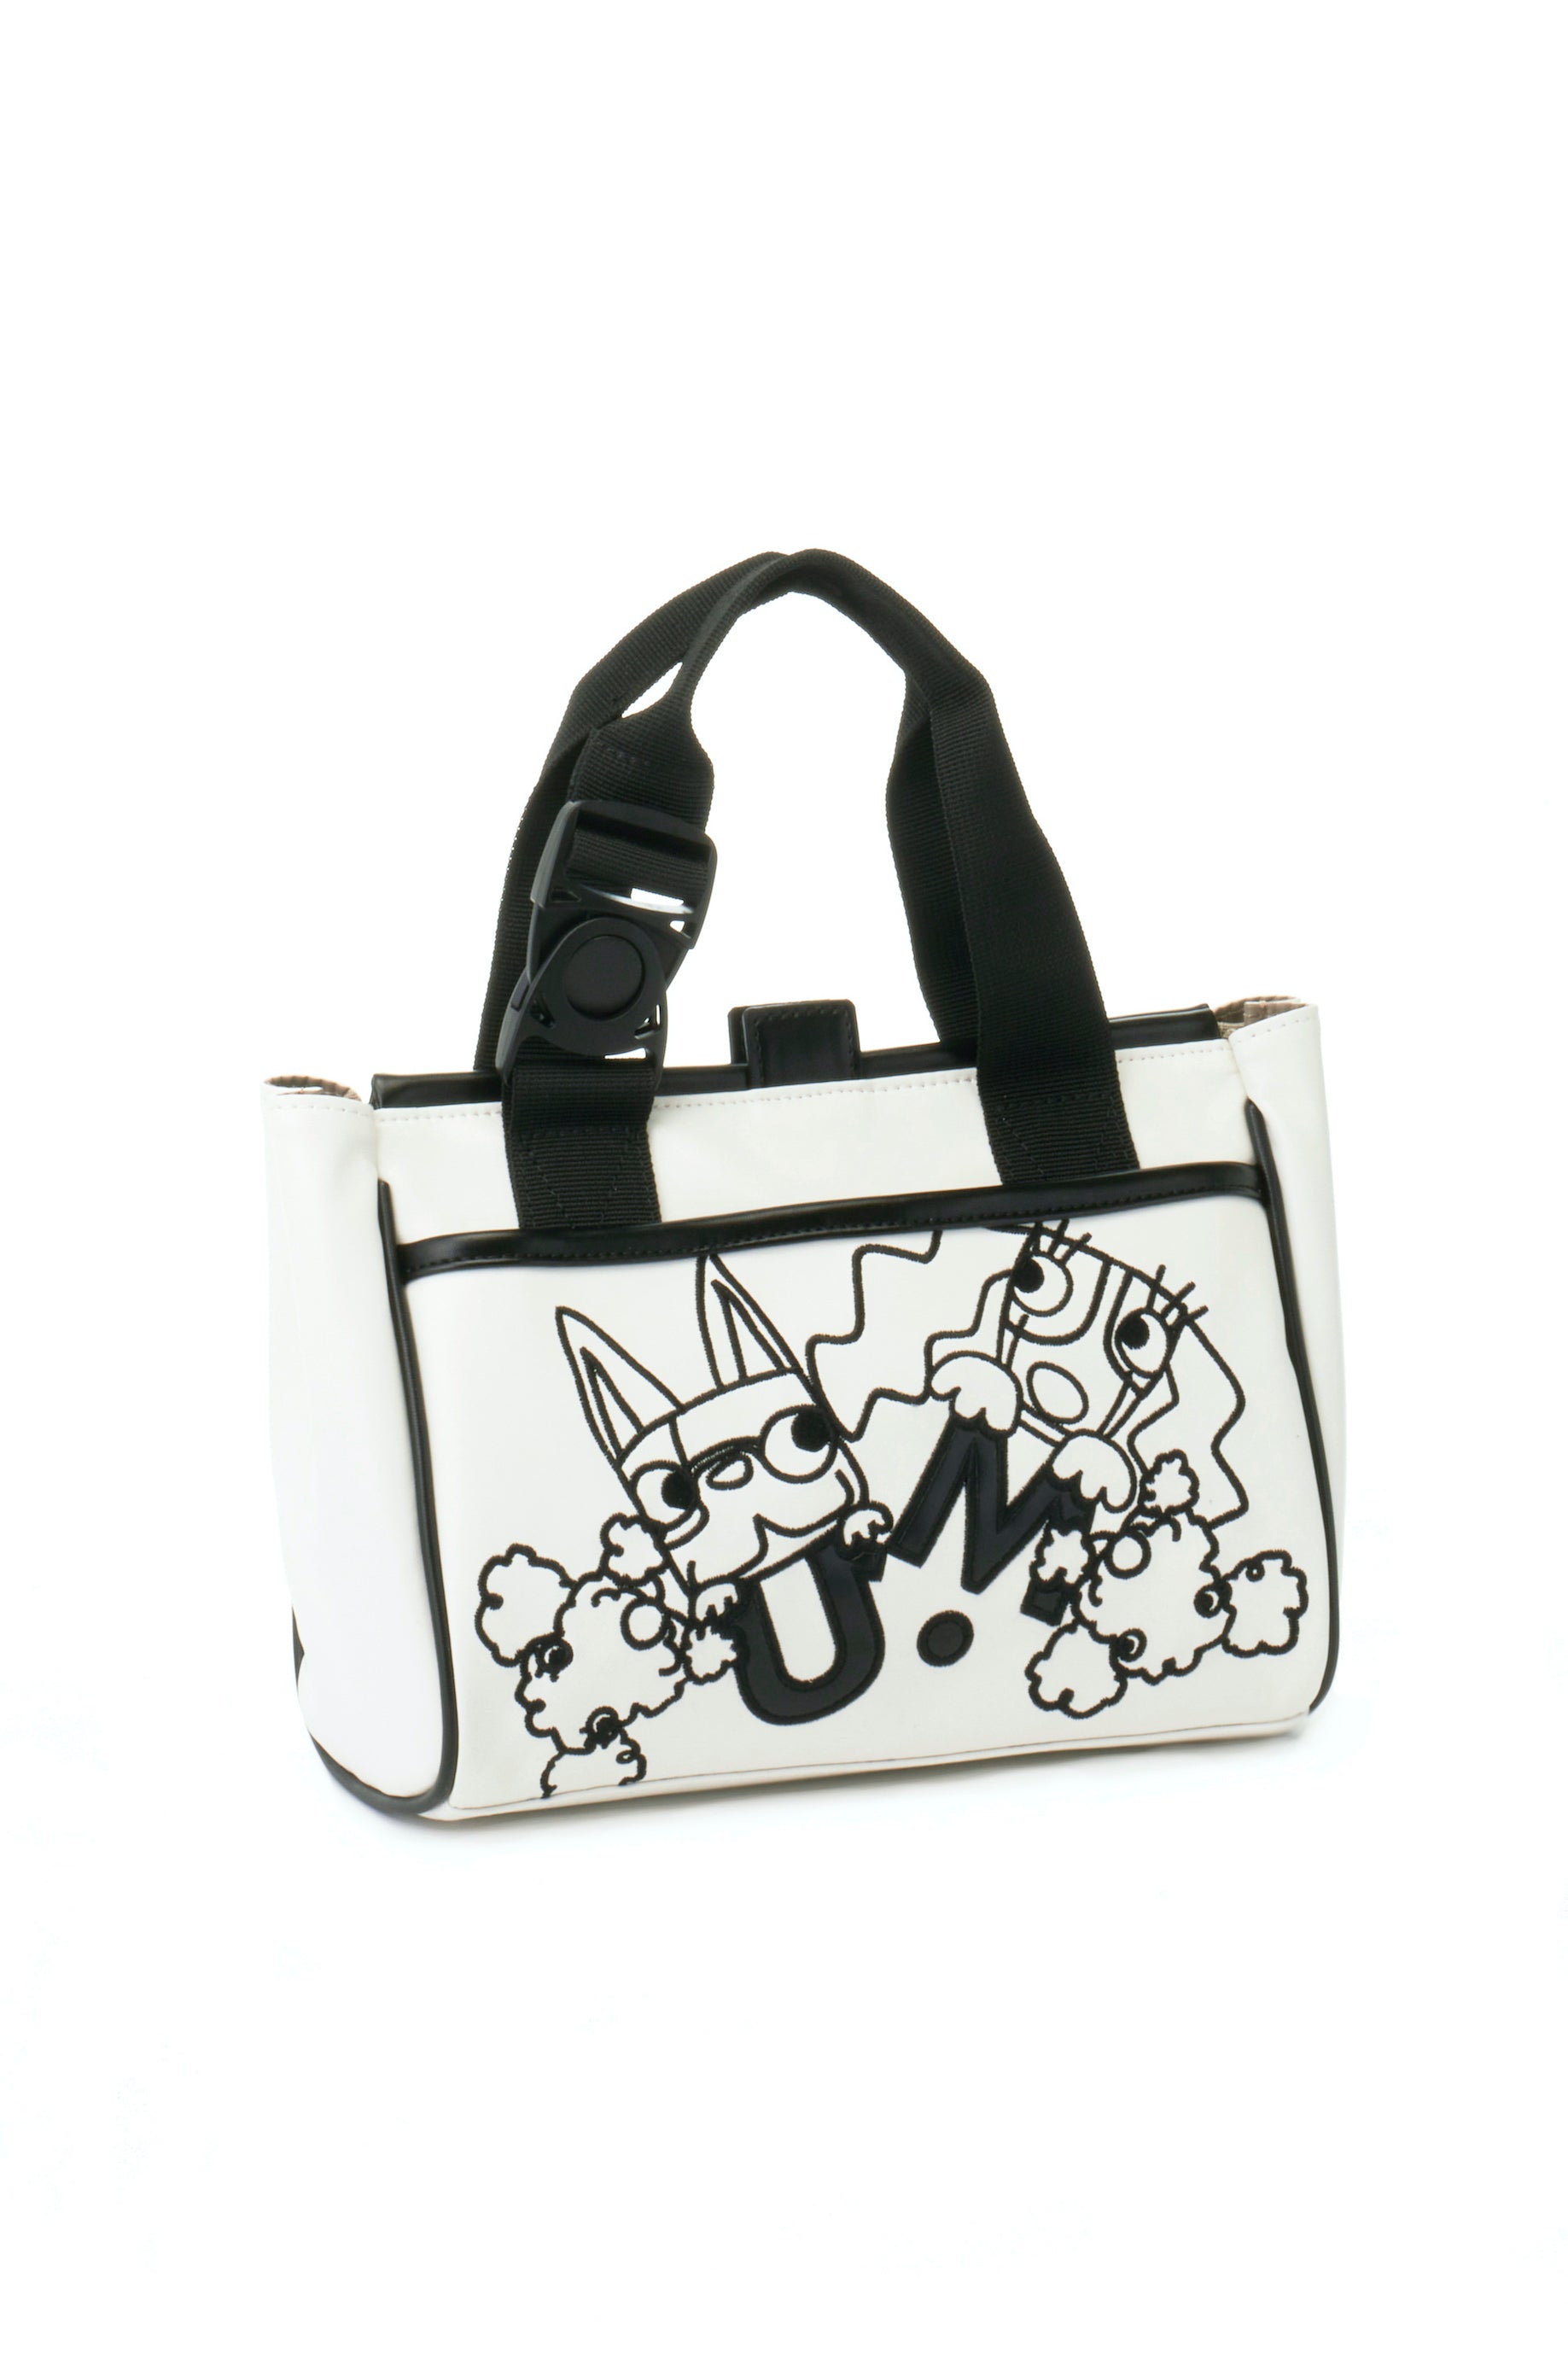 Character single color print pouch (703J1016)